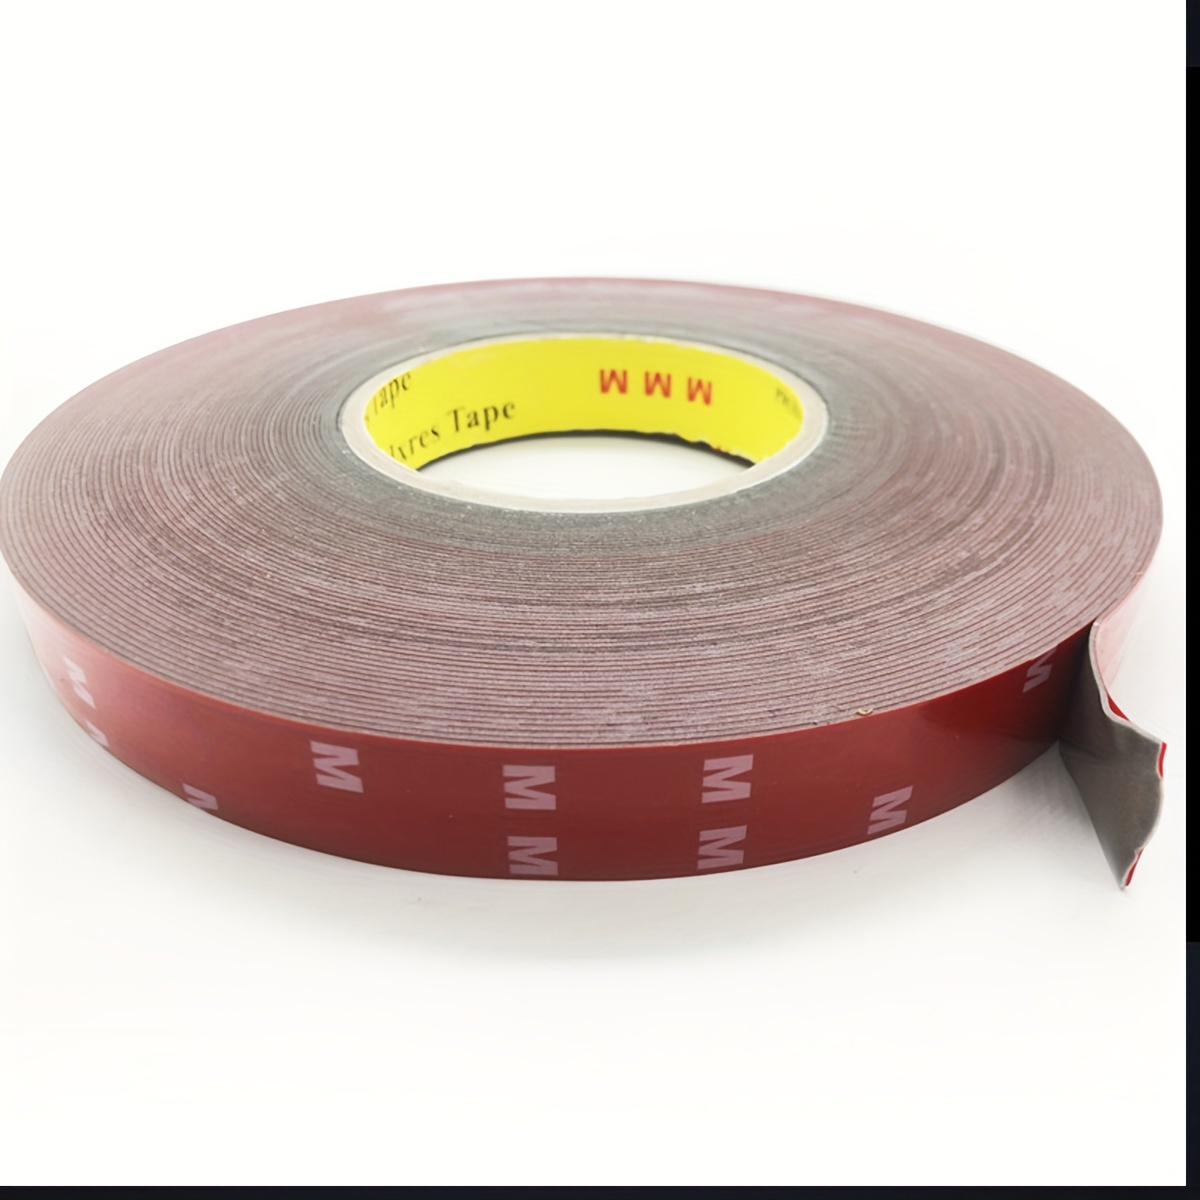 Double Sided Tape Heavy Duty Made of 3M VHB Tape, Two Sided Tape